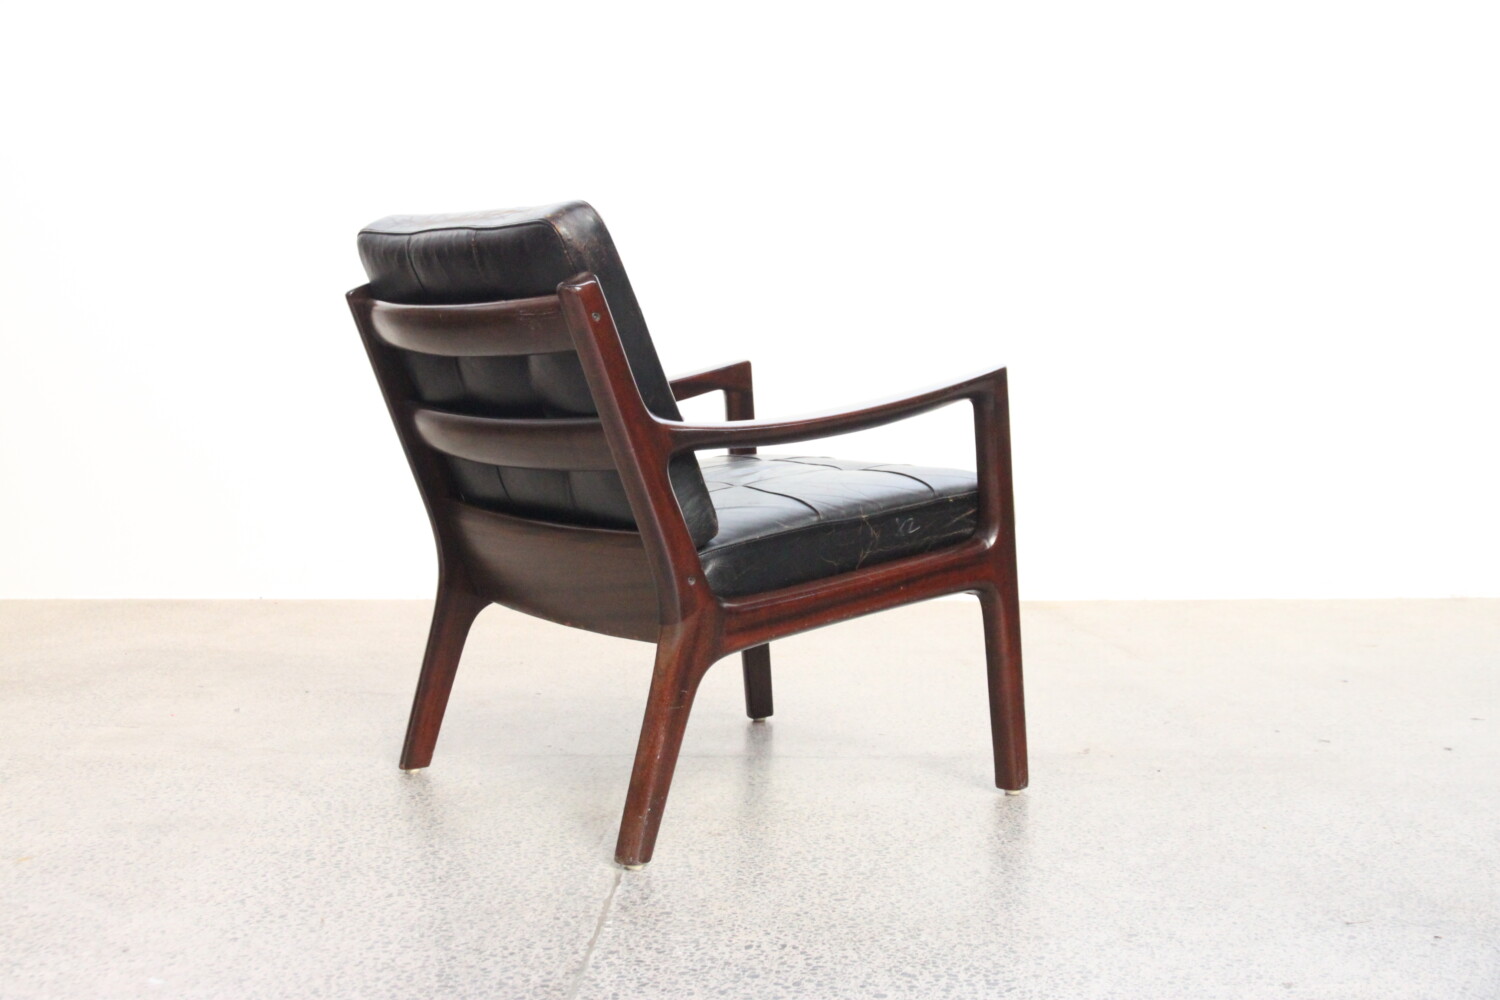 Armchair by Ole Wanscher sold